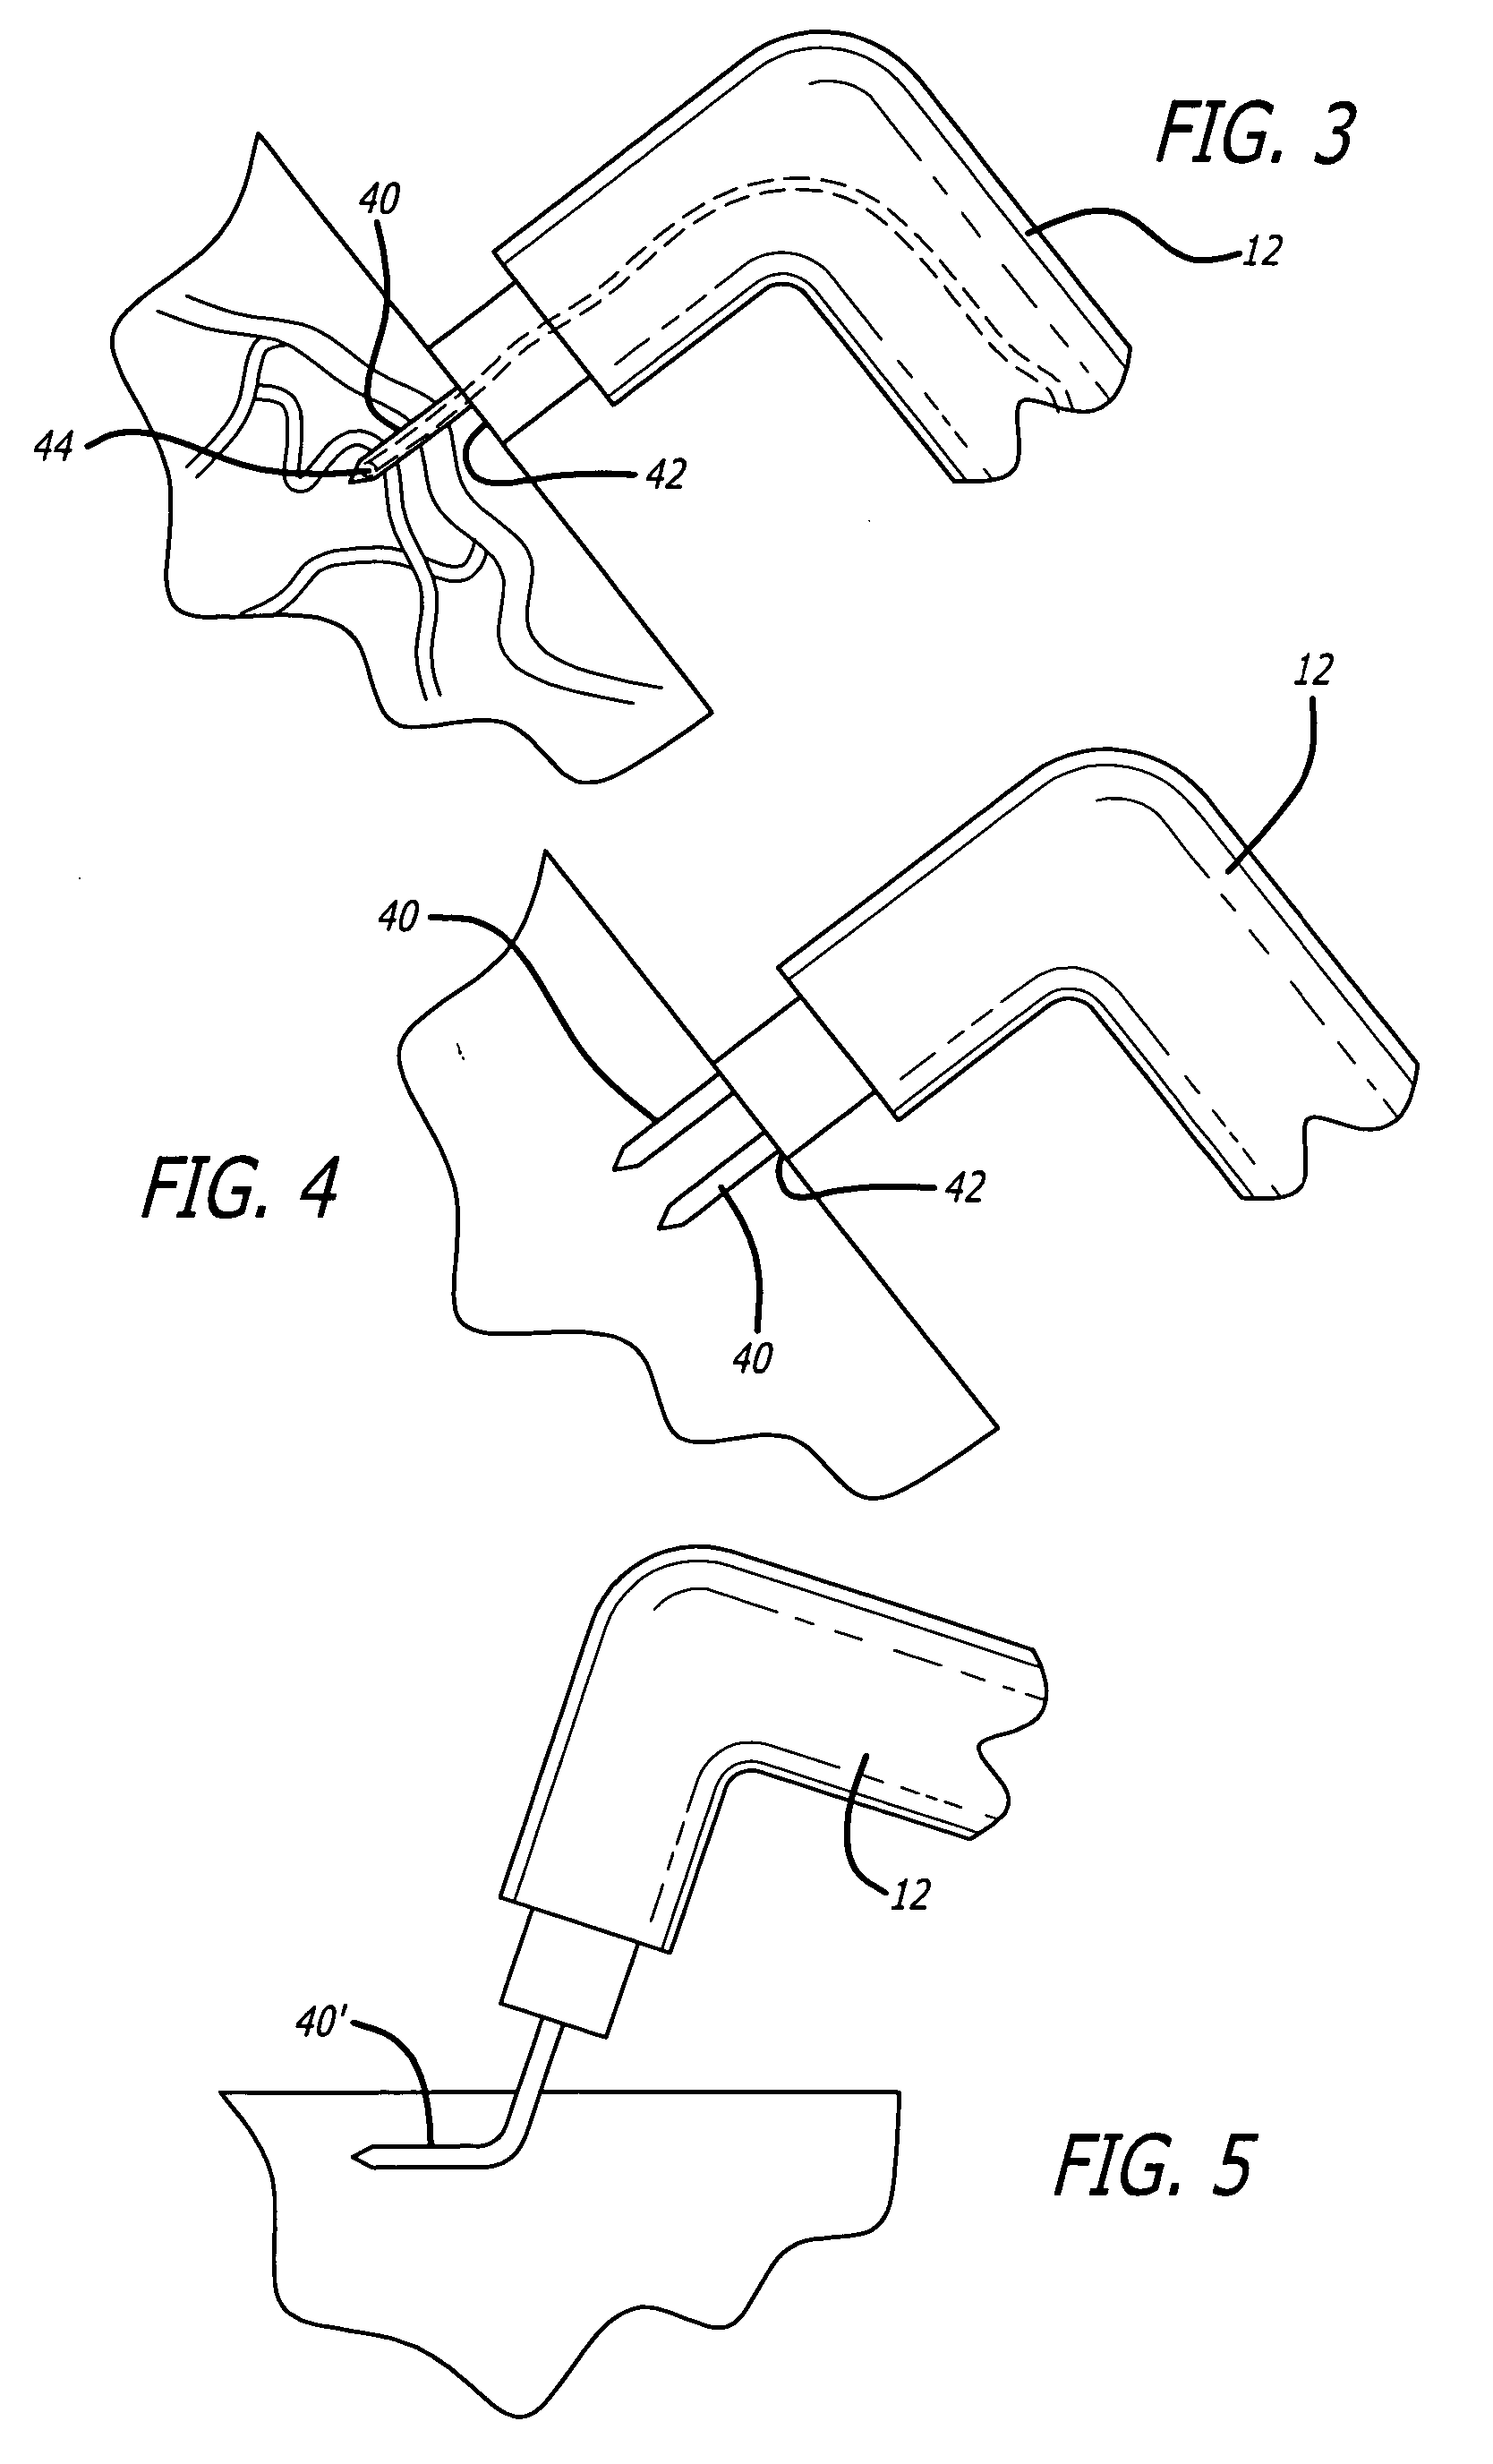 Method and apparatus for shrinking tissue